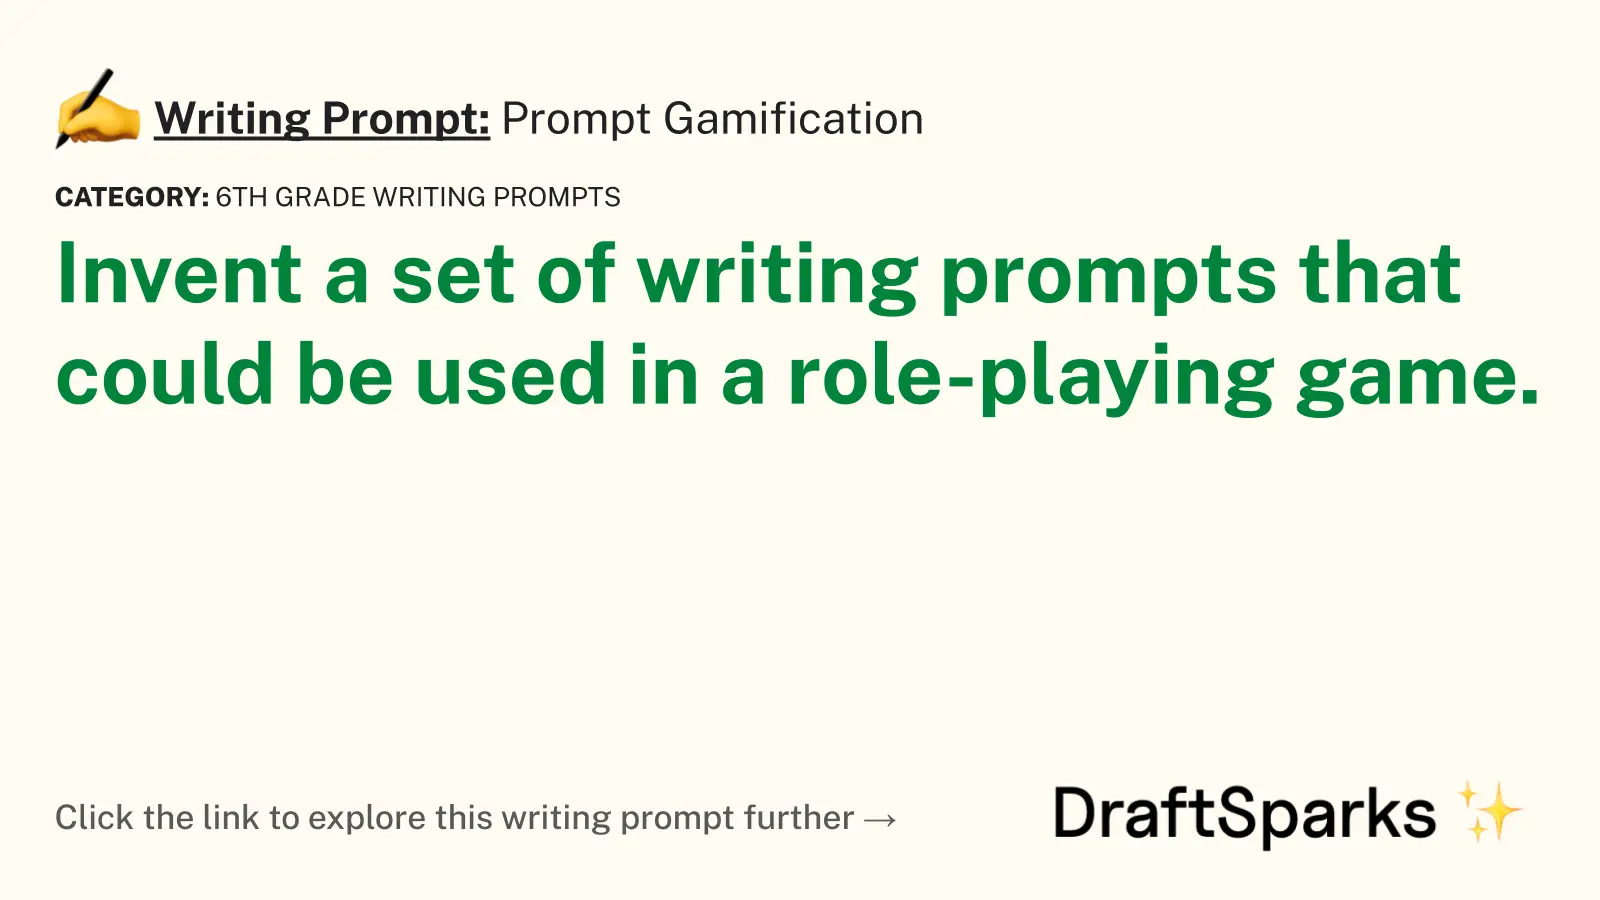 Prompt Gamification